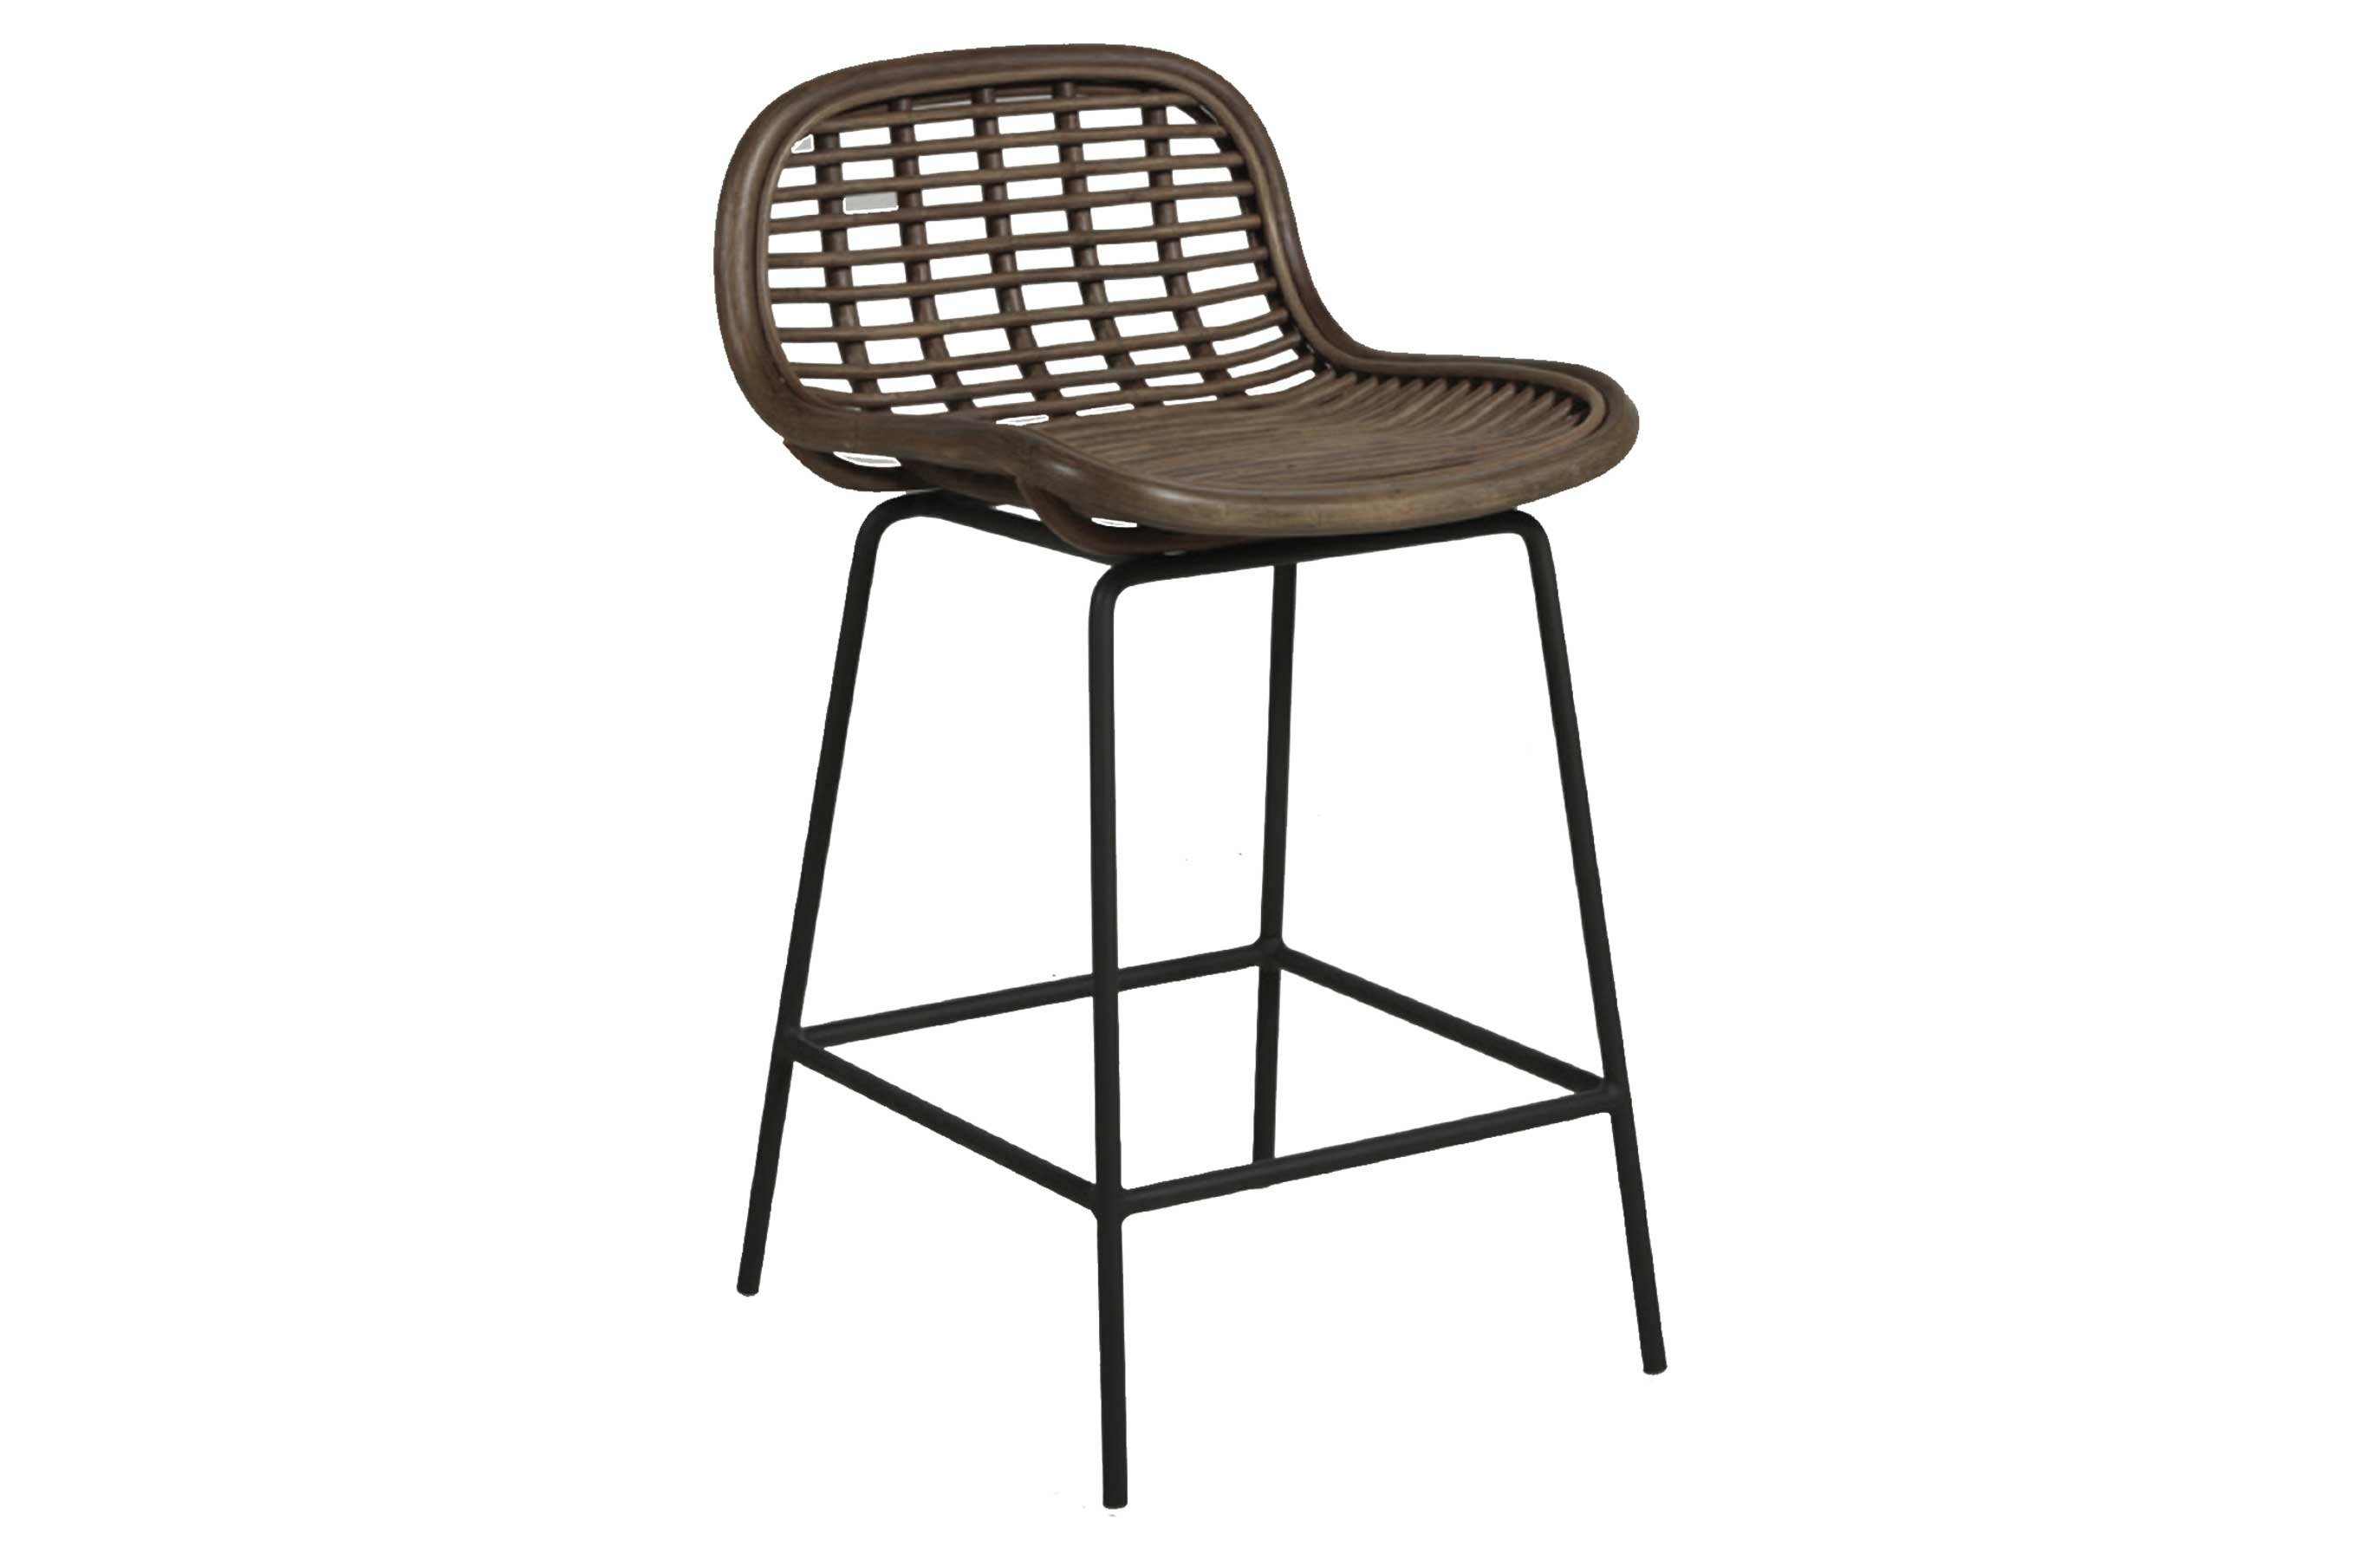 Home Living Furniture Comfortable Lightweight Natural Rattan Barstool Chair NEW